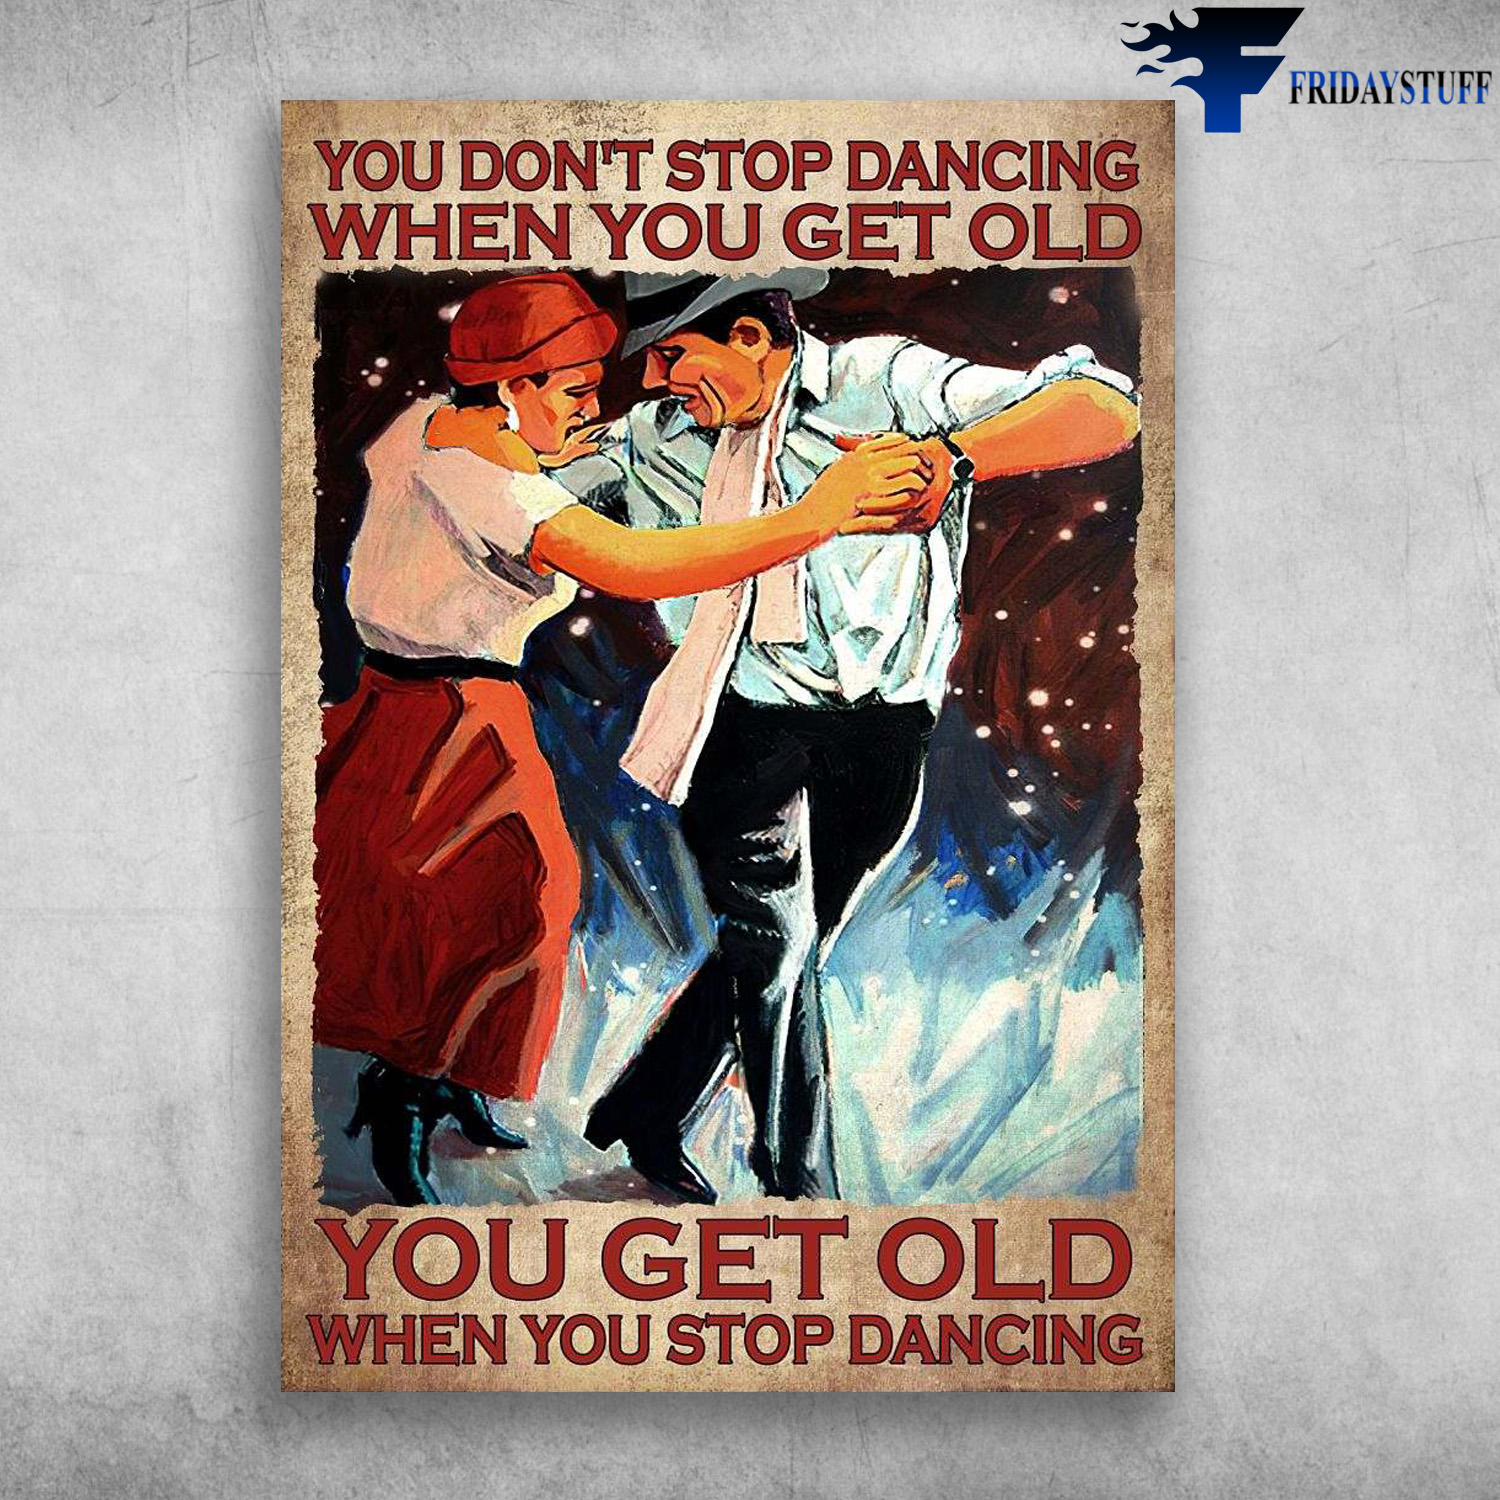 Dancing Couple, Old Couple - You Don' Stop Dancing When You Get Old, You Get Old When You Stop Dancing